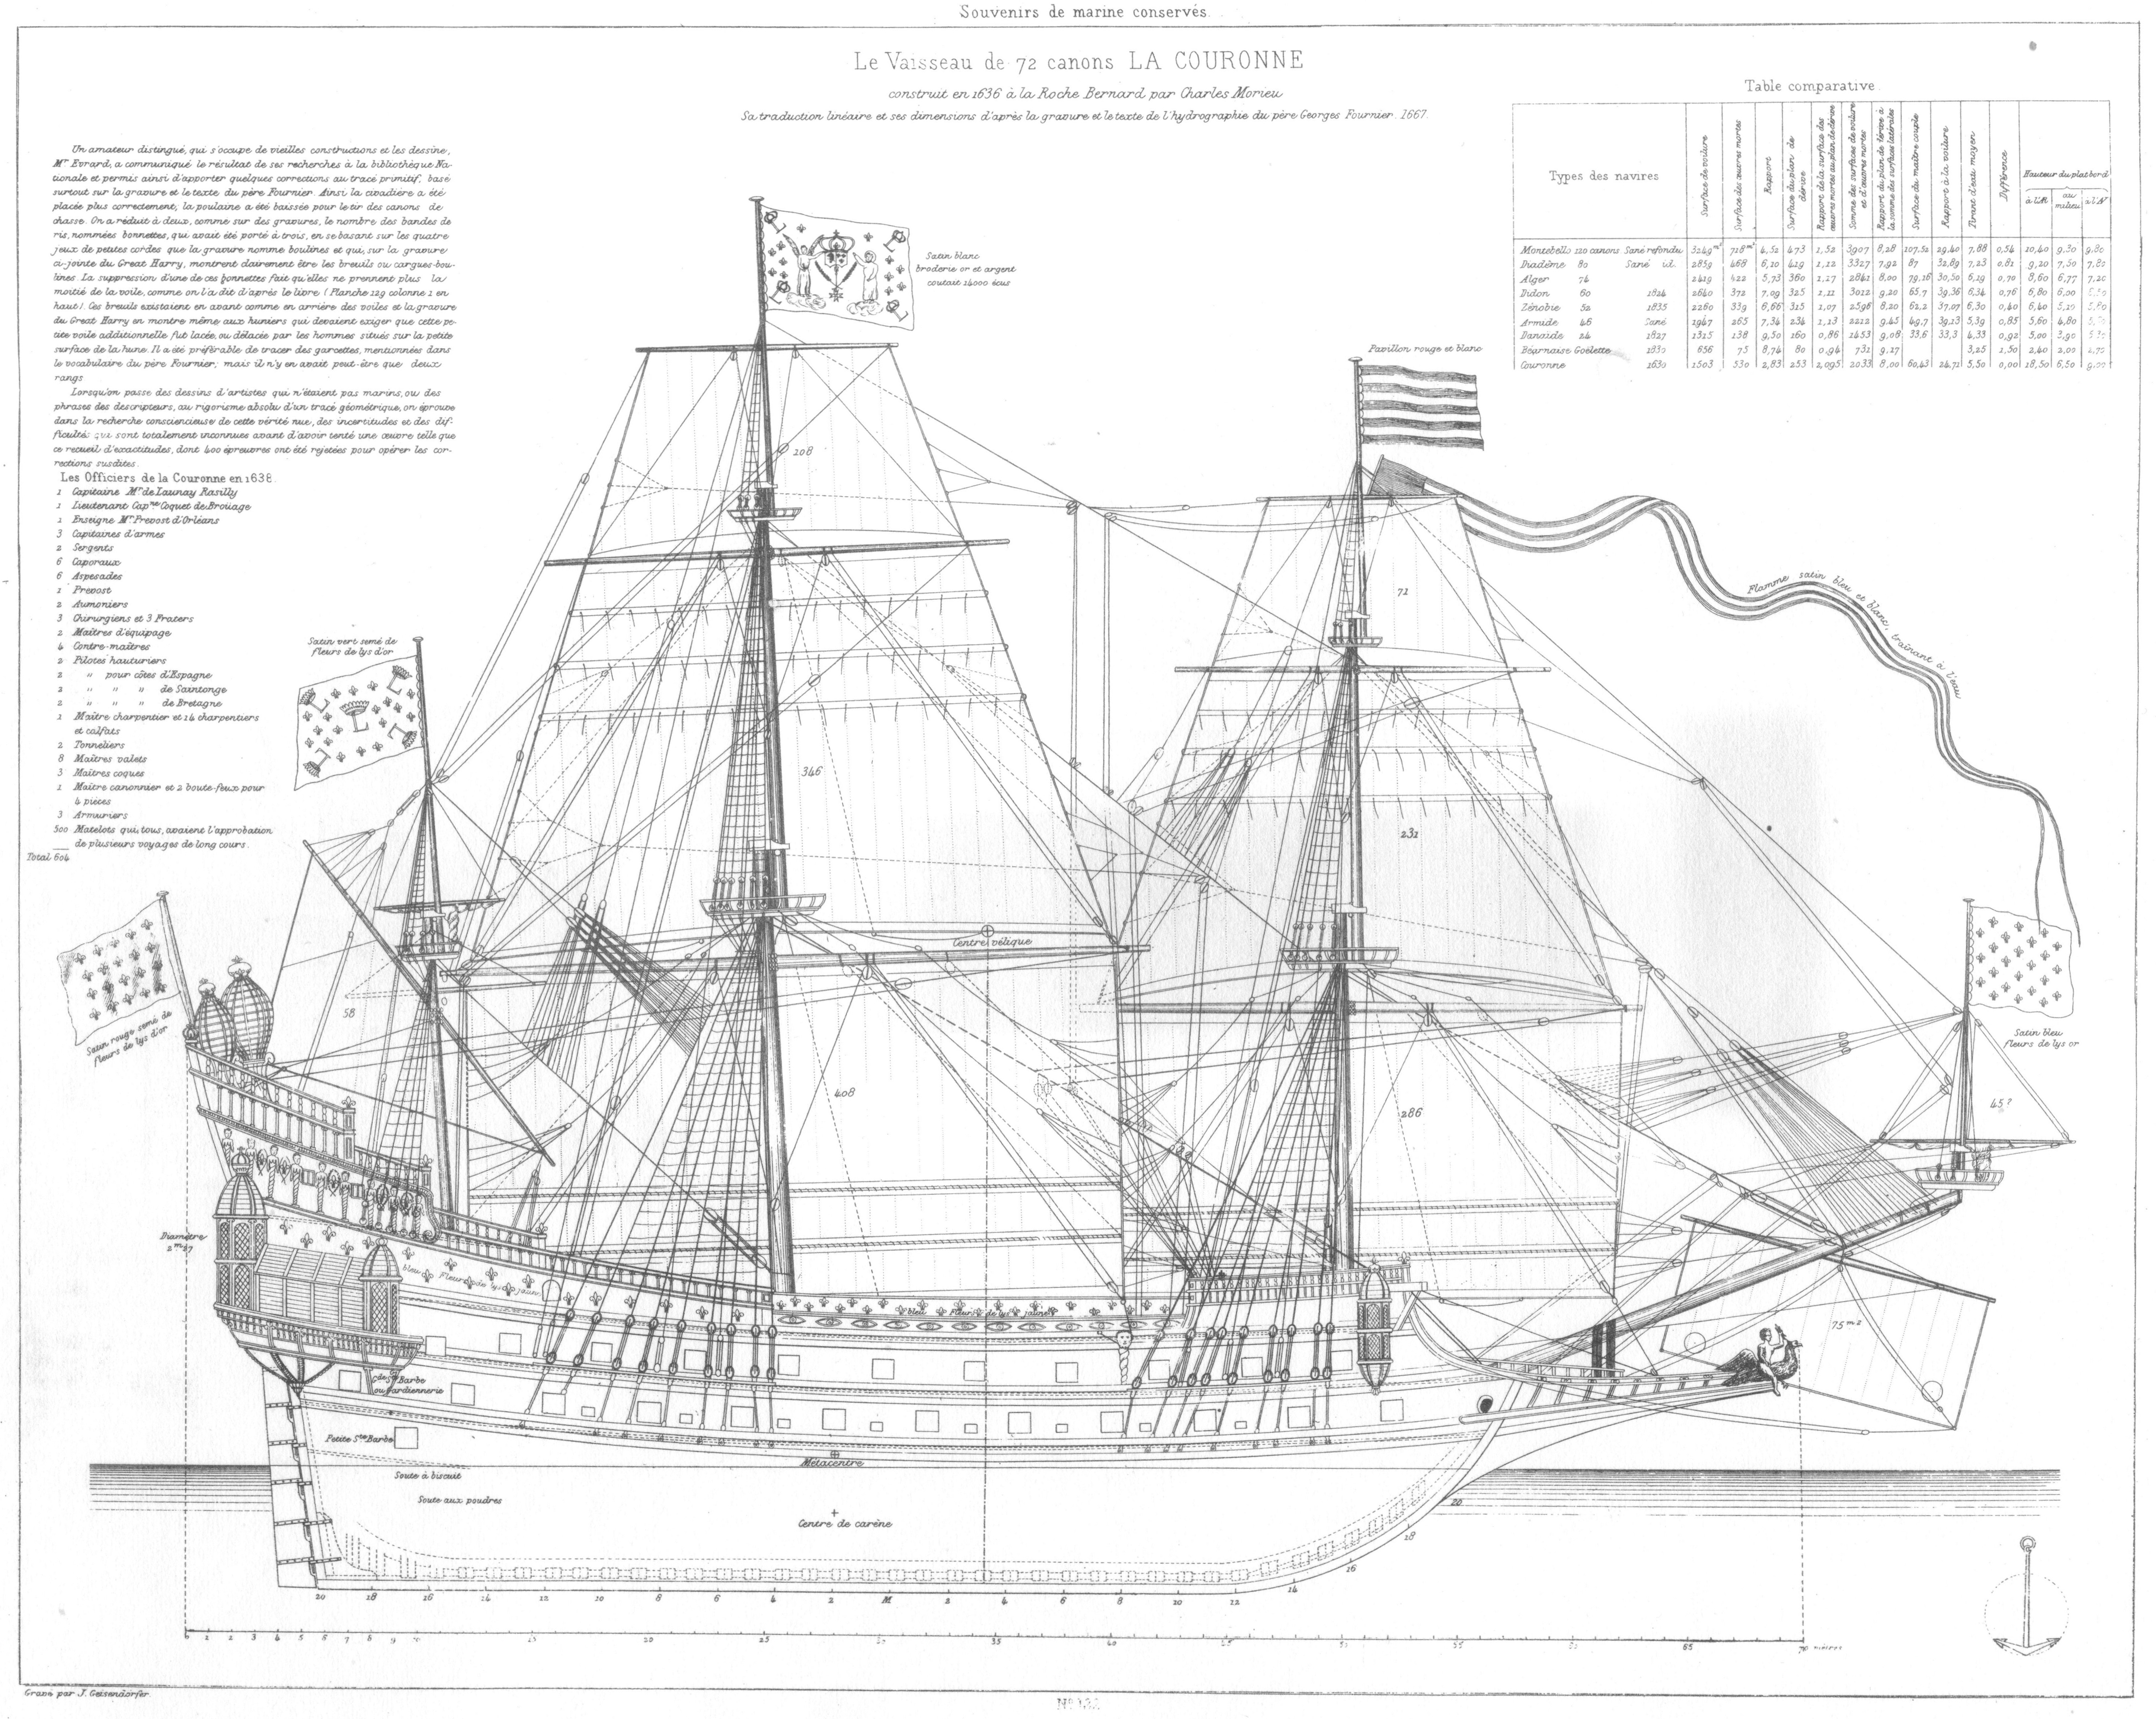 free, ship, plan, Couronne, French, warship, ship-of-the-line, 17th Century, crown, drawing wooden, ship model, scratch, building, sail, vessel, ship model, model shipbuilding, maritime history